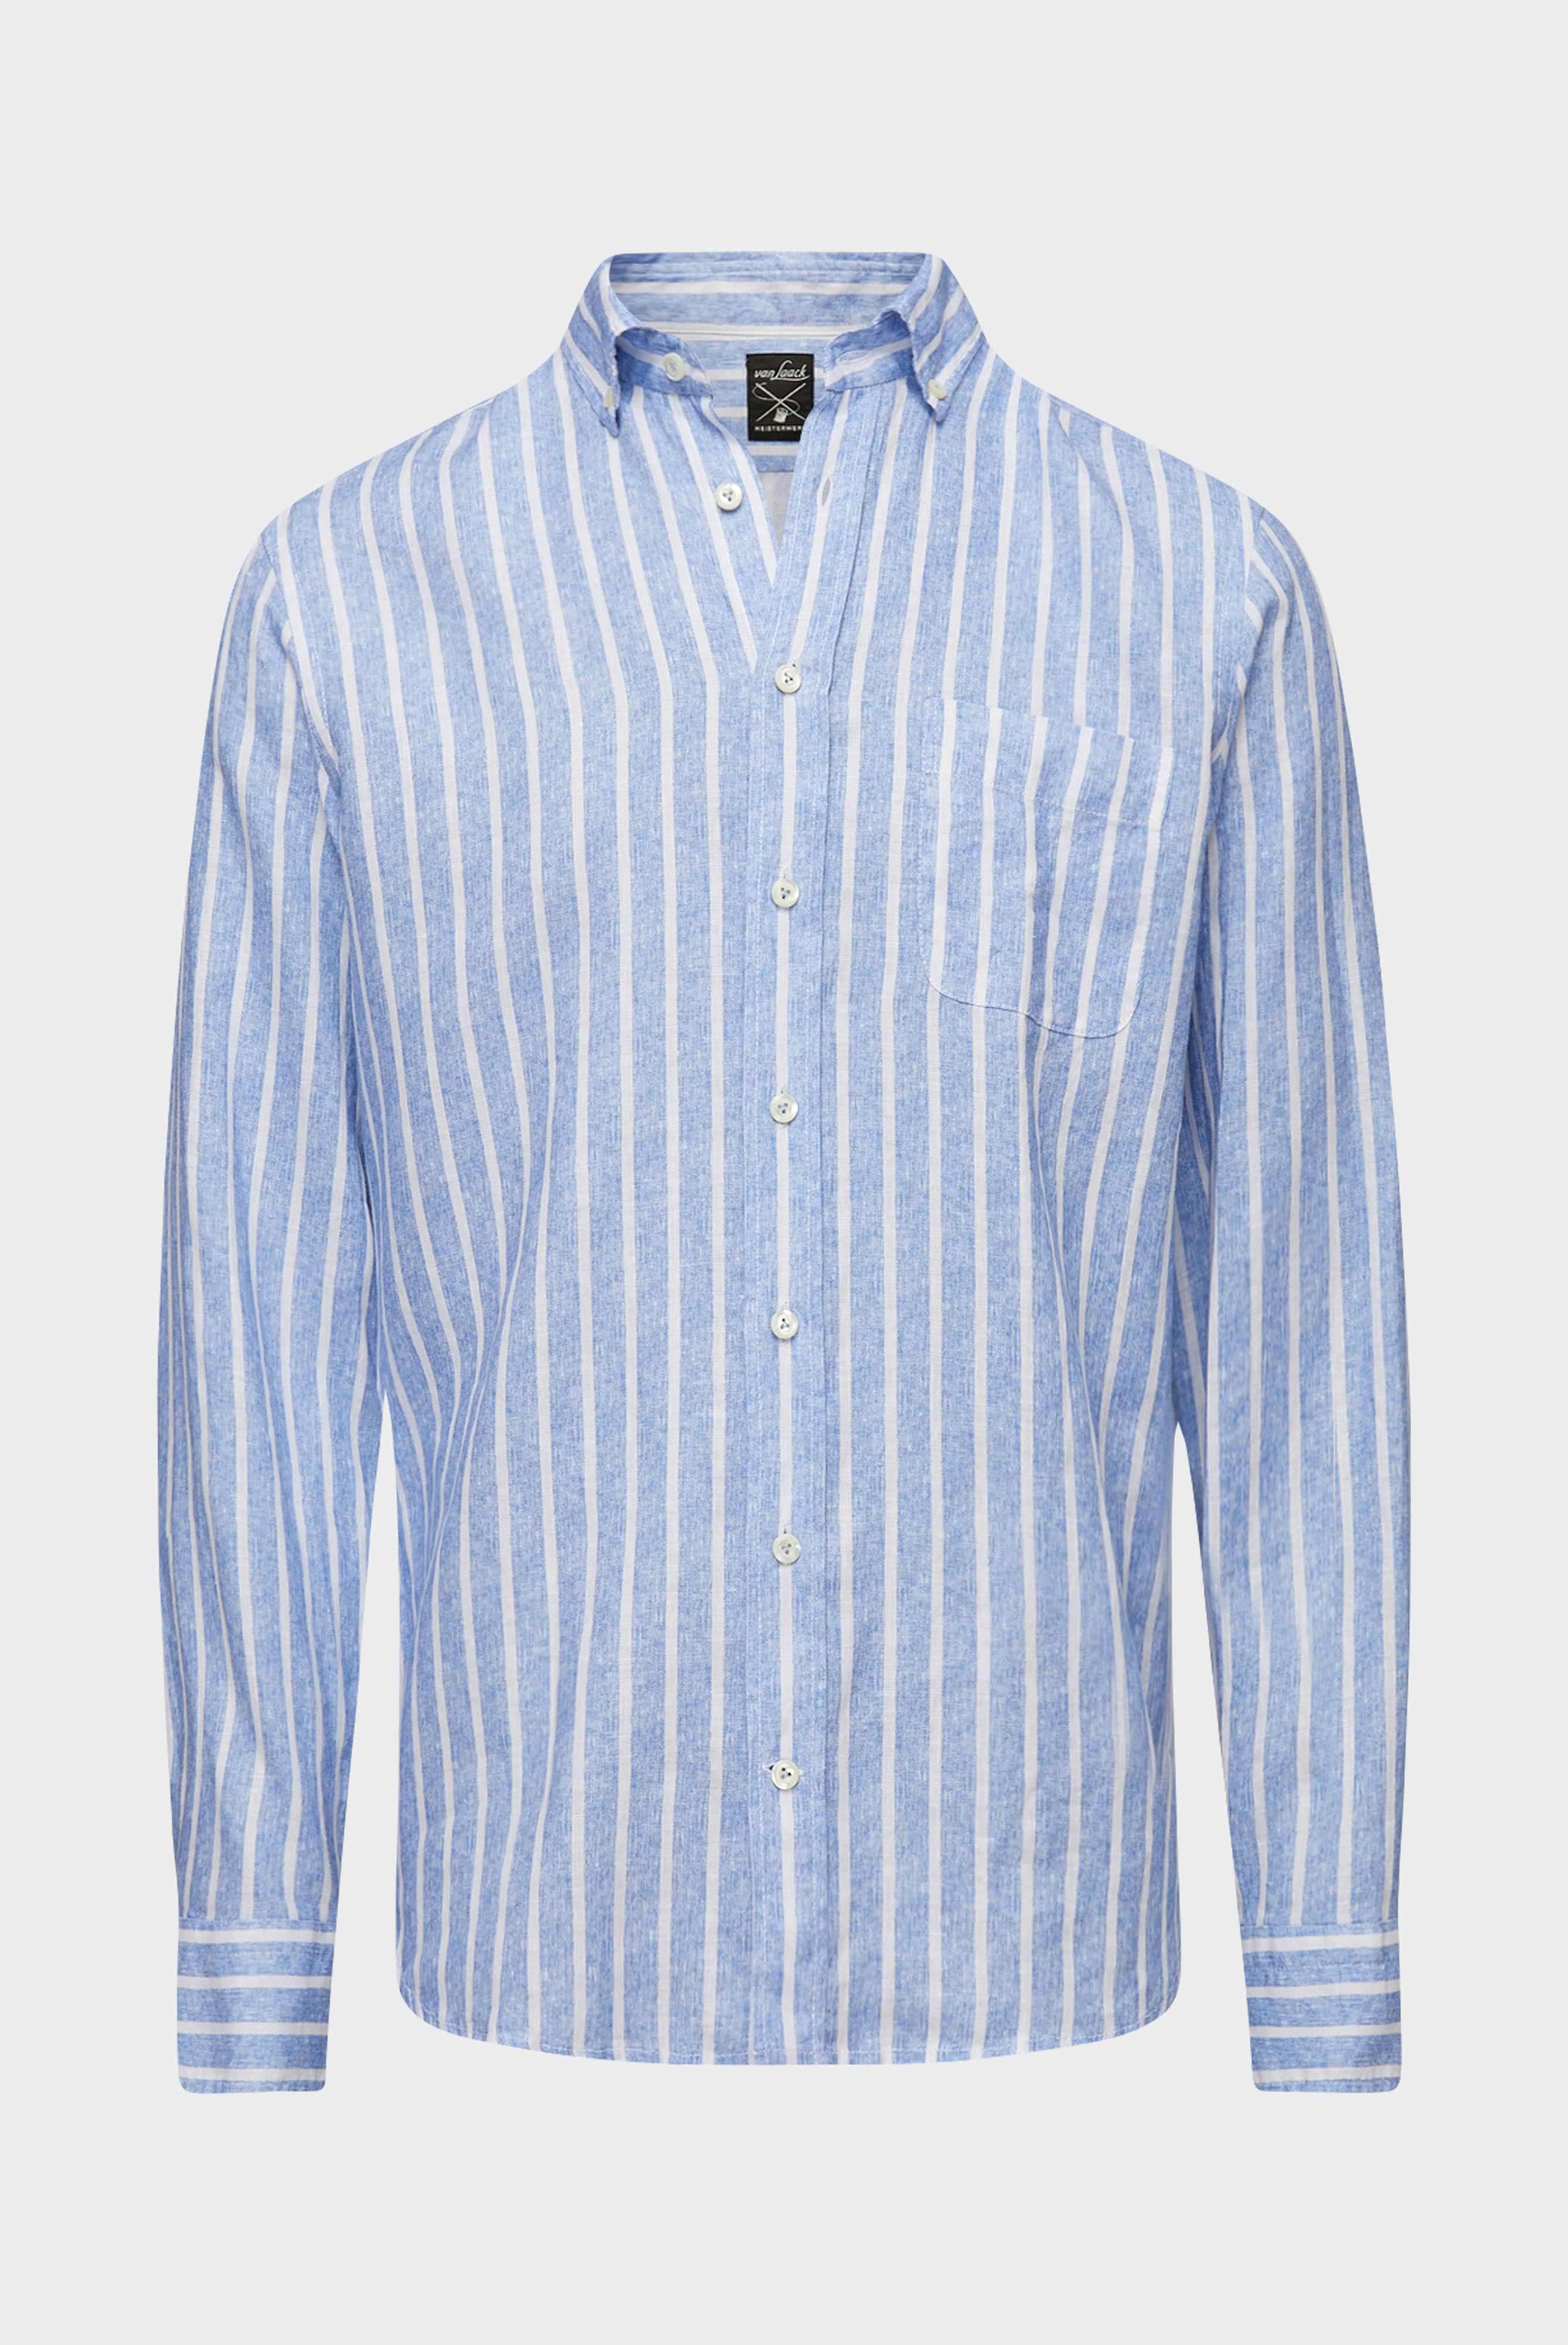 Casual Shirts+Linen button-down hem with stripe print+20.2013.MB.170238.760.40